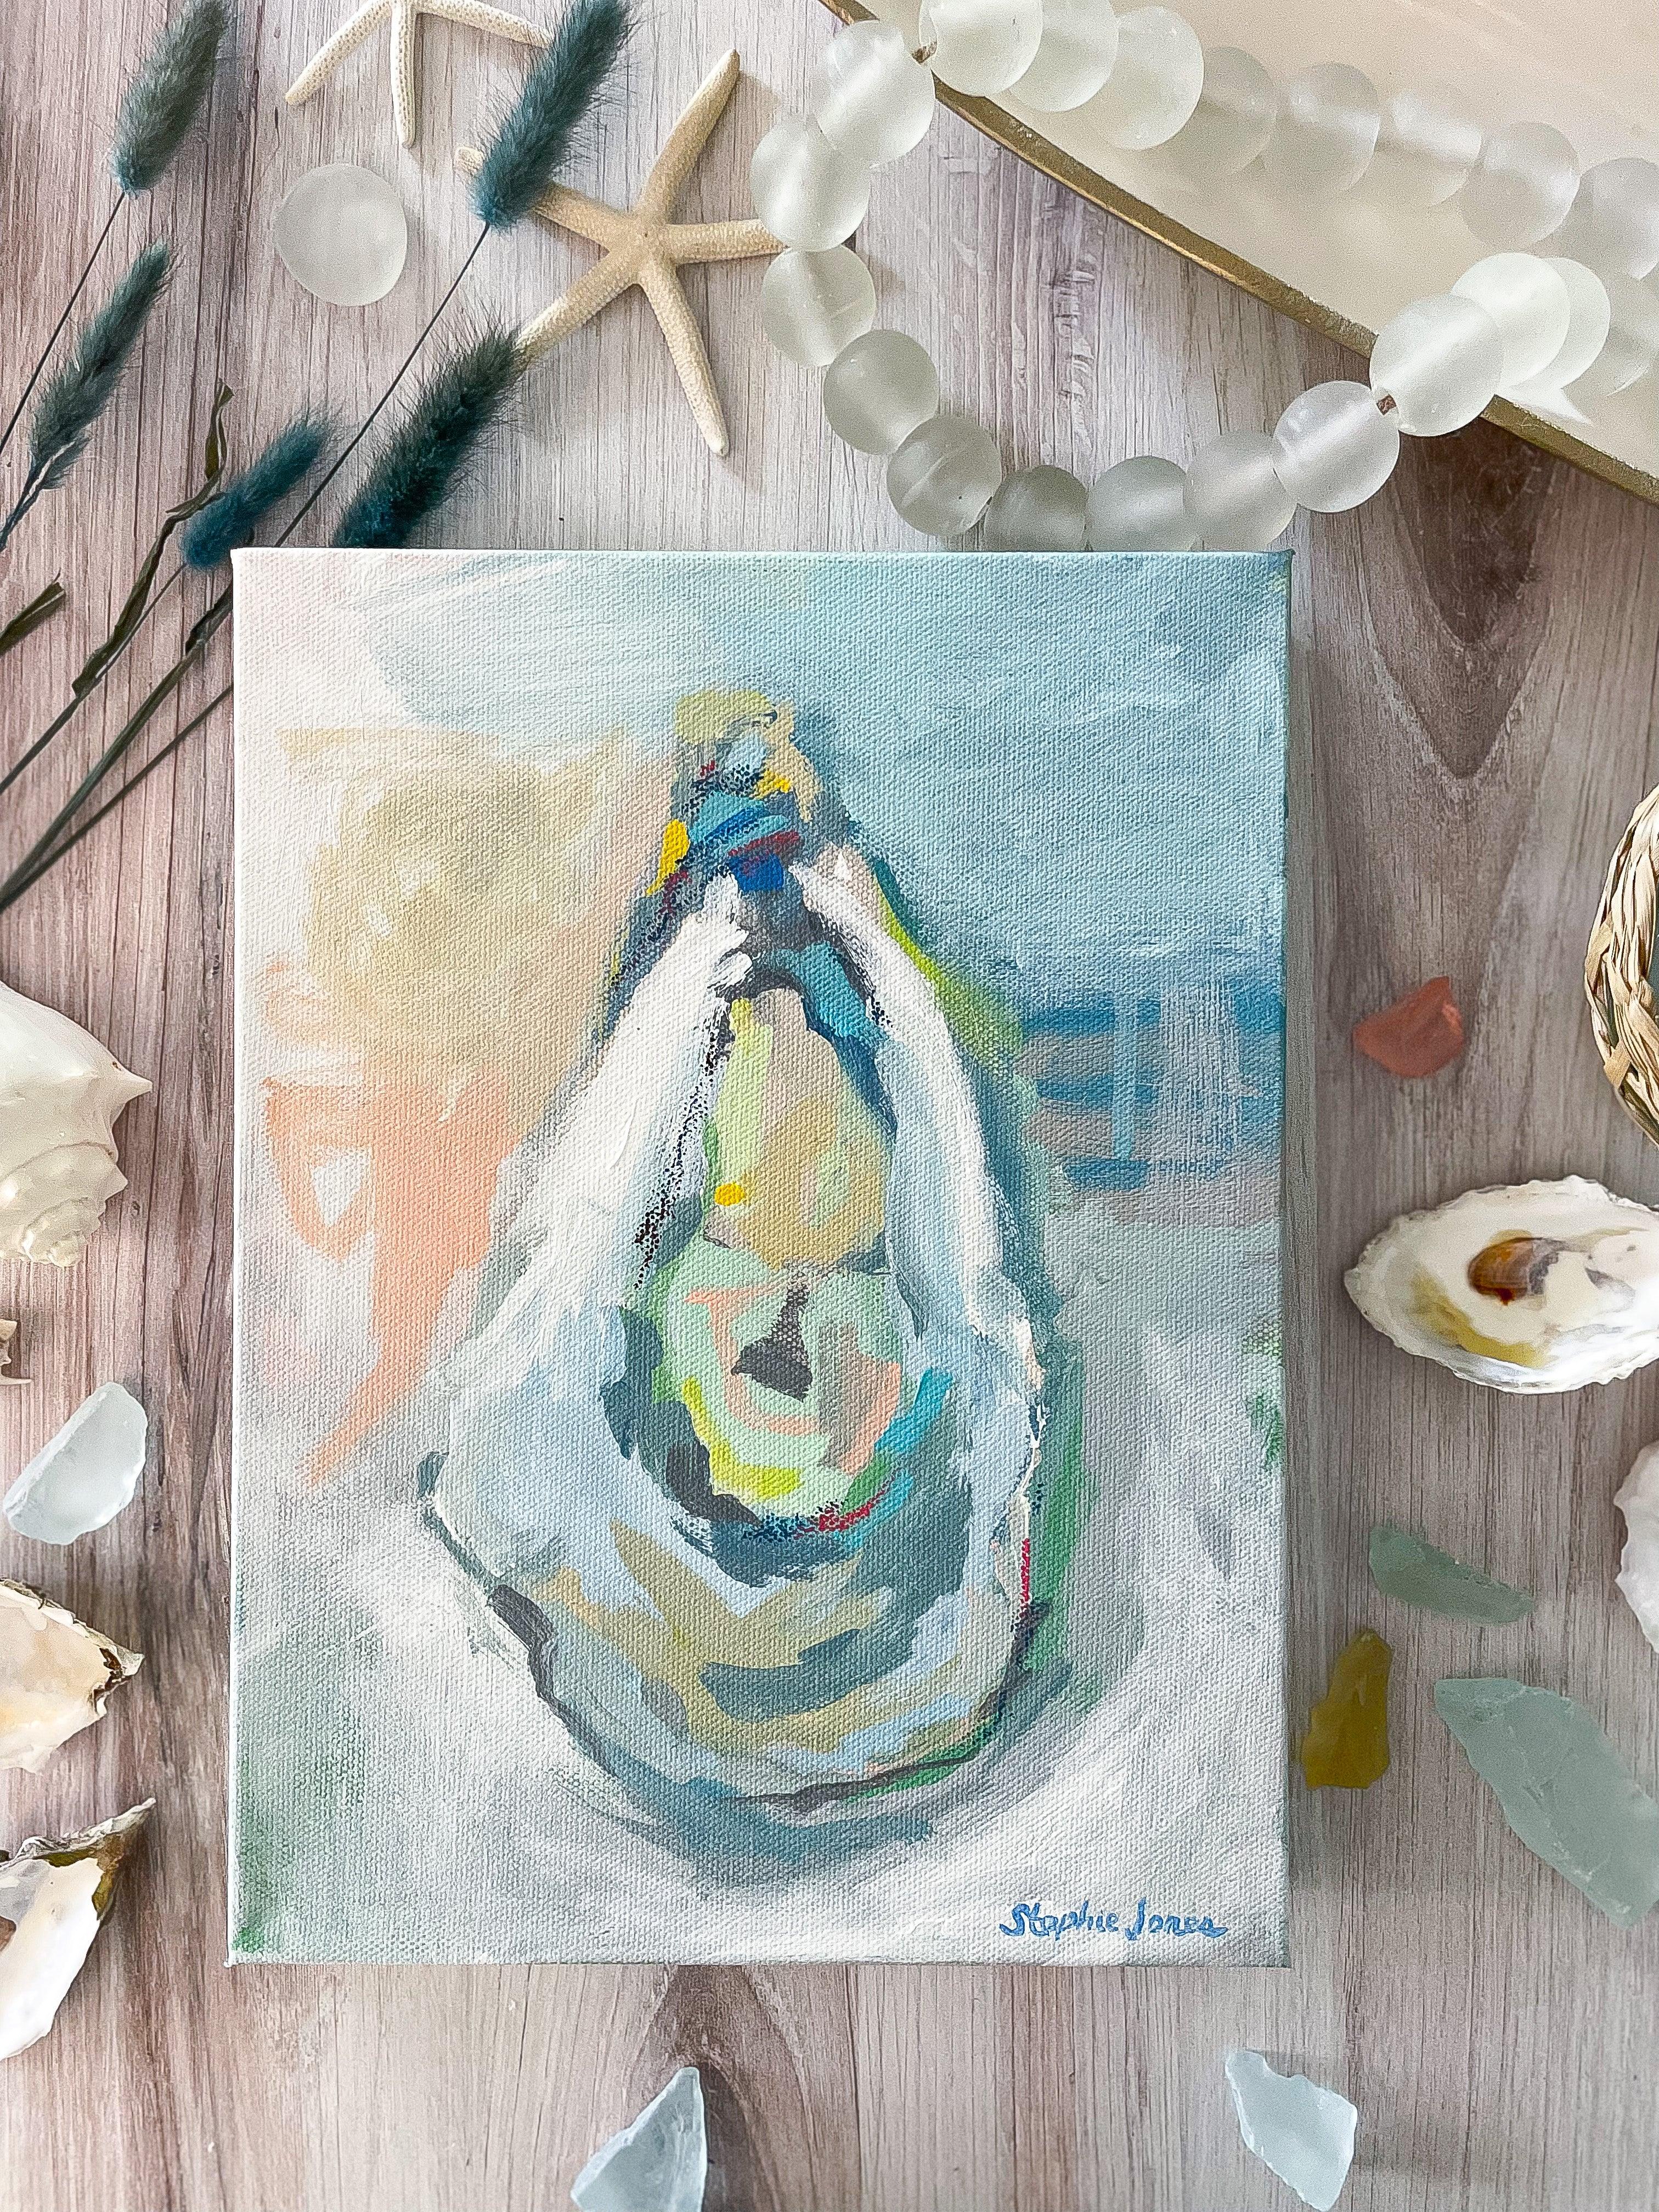 Incandescent Oysters available at Liza Pruitt mid May! - Stephie Jones Art